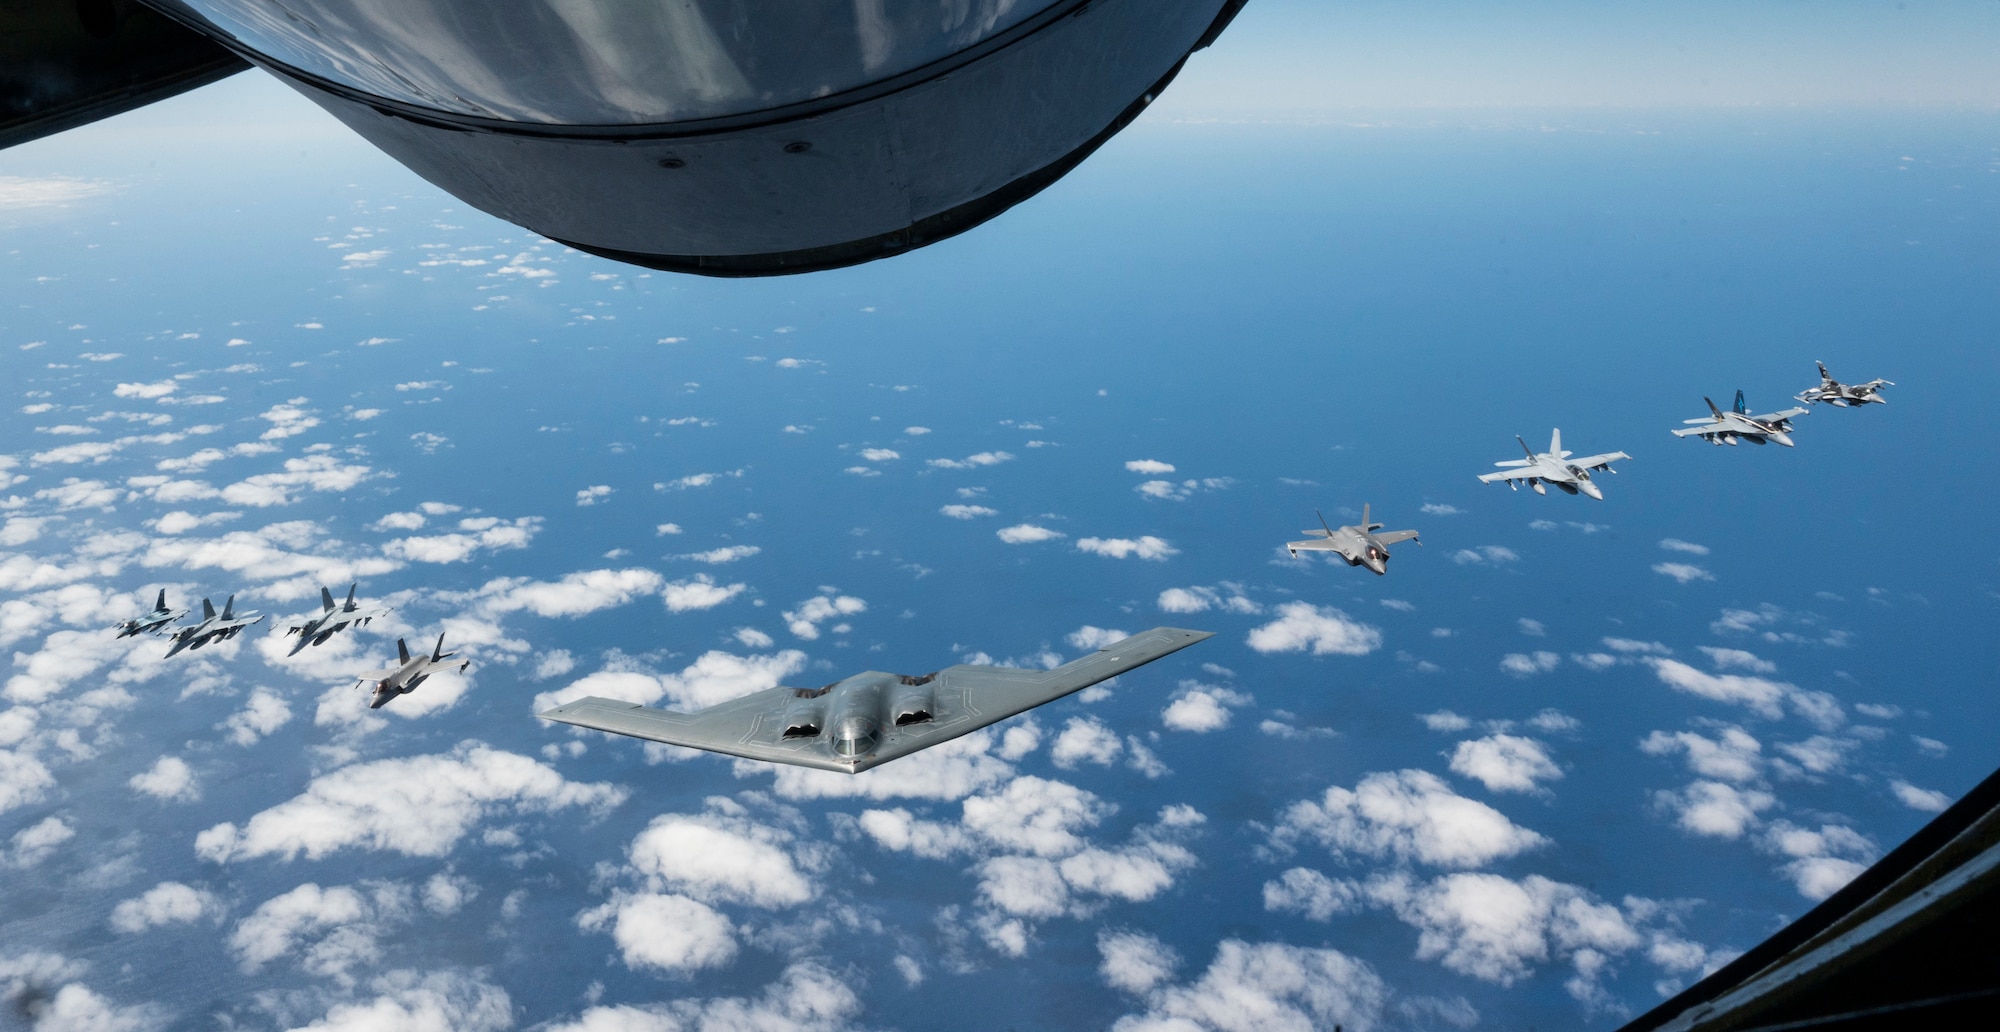 A U.S. Air Force B-2 Spirit from Whiteman Air Force Base, Mo., flies in formation with two Royal Australian Air Force F-35A Lightning IIs, two RAAF F/A-18F Super Hornets, two RAAF EA-18 Growlers, and two U.S. Air Force F-16C Aggressors from Eielson Air Force Base, Alaska during a training mission in the Indo-Pacific region, March 23, 2022. Once in Australian airspace, the B-2 crews from the 509th Bomb Wing teamed up with a KC-135 Stratotanker from the Alaska Air National Guard to complete aerial refueling before integrating with the eight fighter aircraft. (U.S. Air Force photo by Tech. Sgt. Hailey Haux)